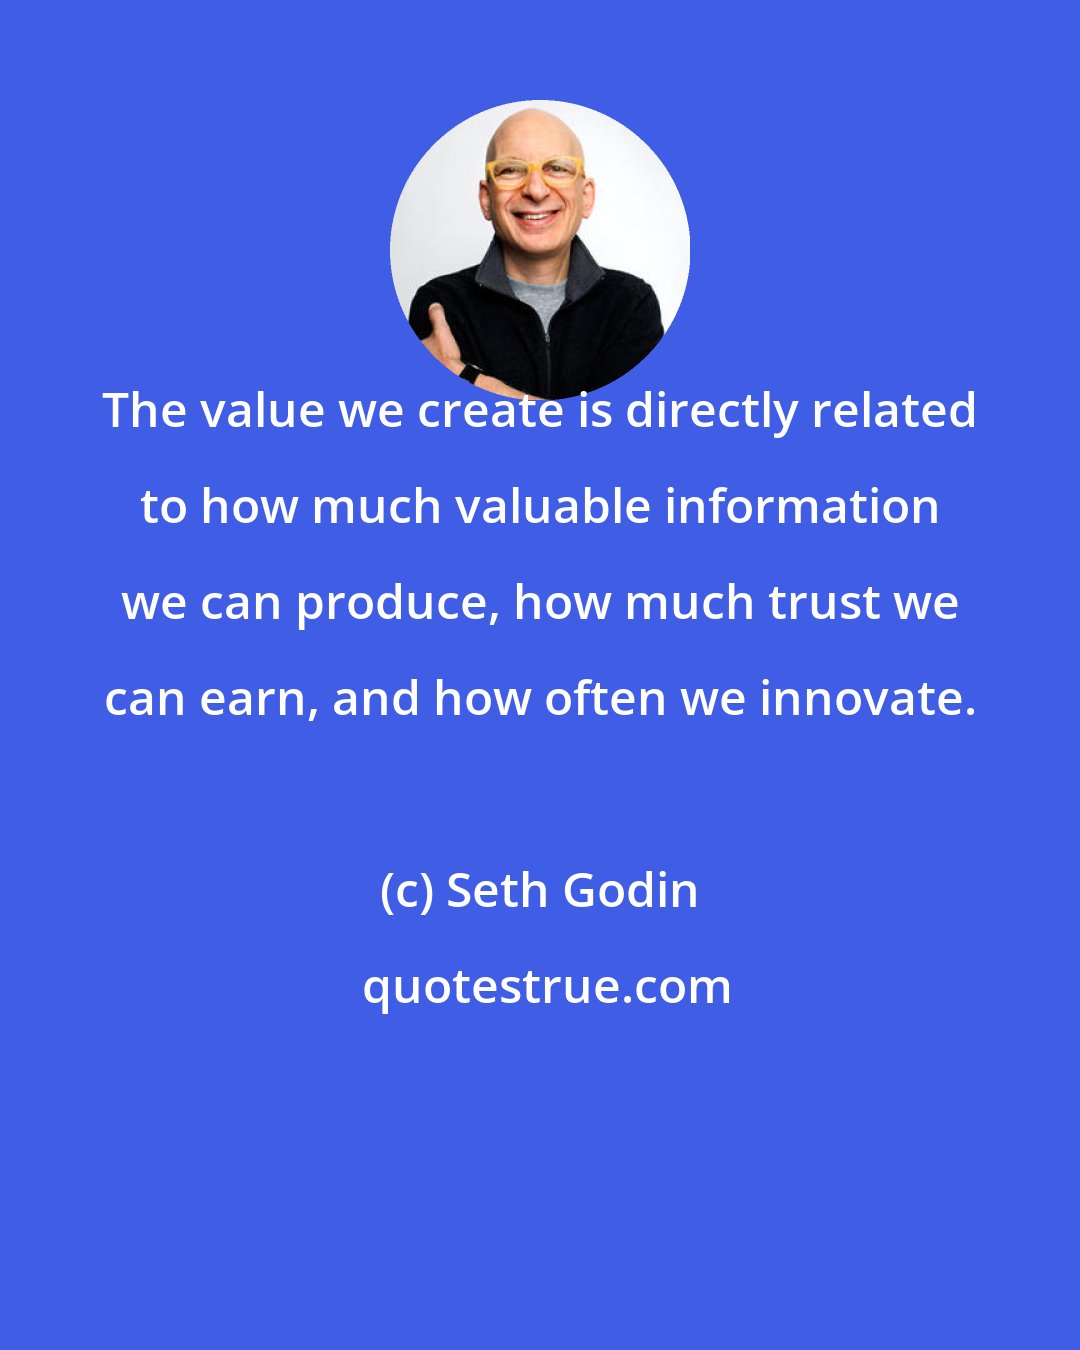 Seth Godin: The value we create is directly related to how much valuable information we can produce, how much trust we can earn, and how often we innovate.